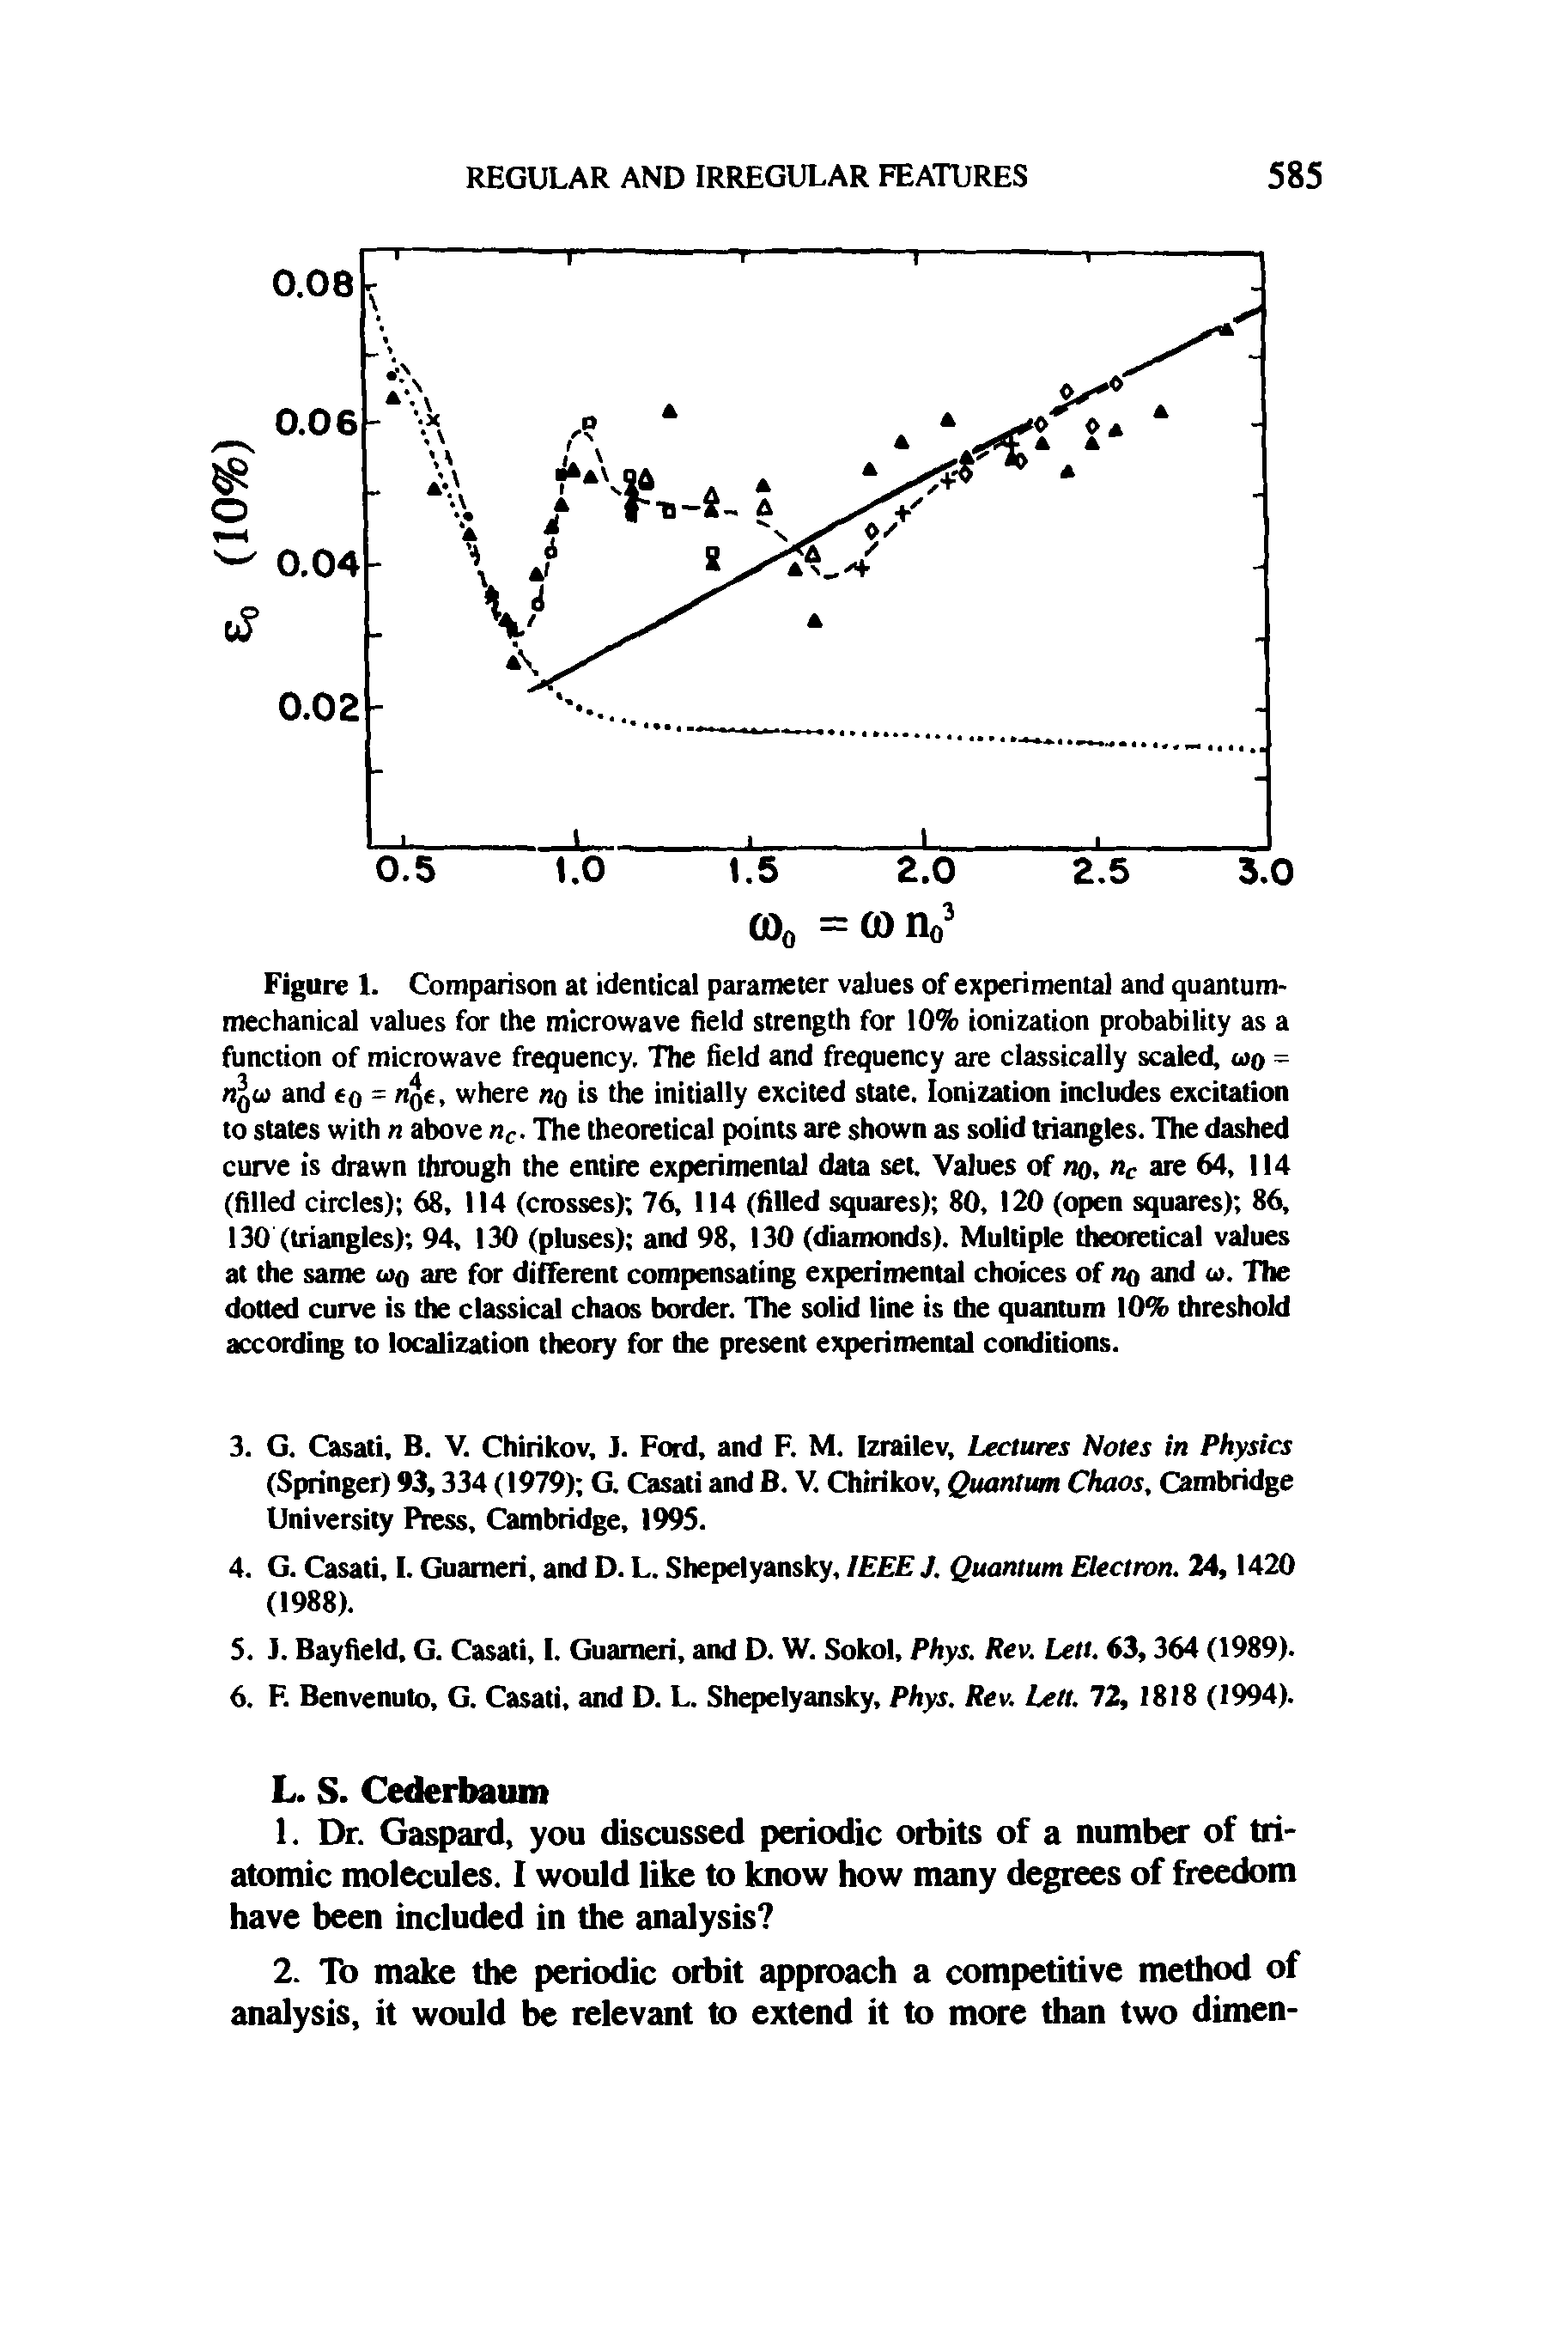 Figure 1. Comparison at identical parameter values of experimental and quantum-mechanical values for the microwave field strength for 10% ionization probability as a function of microwave frequency. The field and frequency are classically scaled, u>o = and = q6, where no is the initially excited state. Ionization includes excitation to states with n above nc. The theoretical points are shown as solid triangles. The dashed curve is drawn through the entire experimental data set. Values of no, nc are 64, 114 (filled circles) 68, 114 (crosses) 76, 114 (filled squares) 80, 120 (open squares) 86, 130 (triangles) 94, 130 (pluses) and 98, 130 (diamonds). Multiple theoretical values at the same uq are for different compensating experimental choices of no and a. The dotted curve is the classical chaos border. The solid line is the quantum 10% threshold according to localization theory for the present experimental conditions.